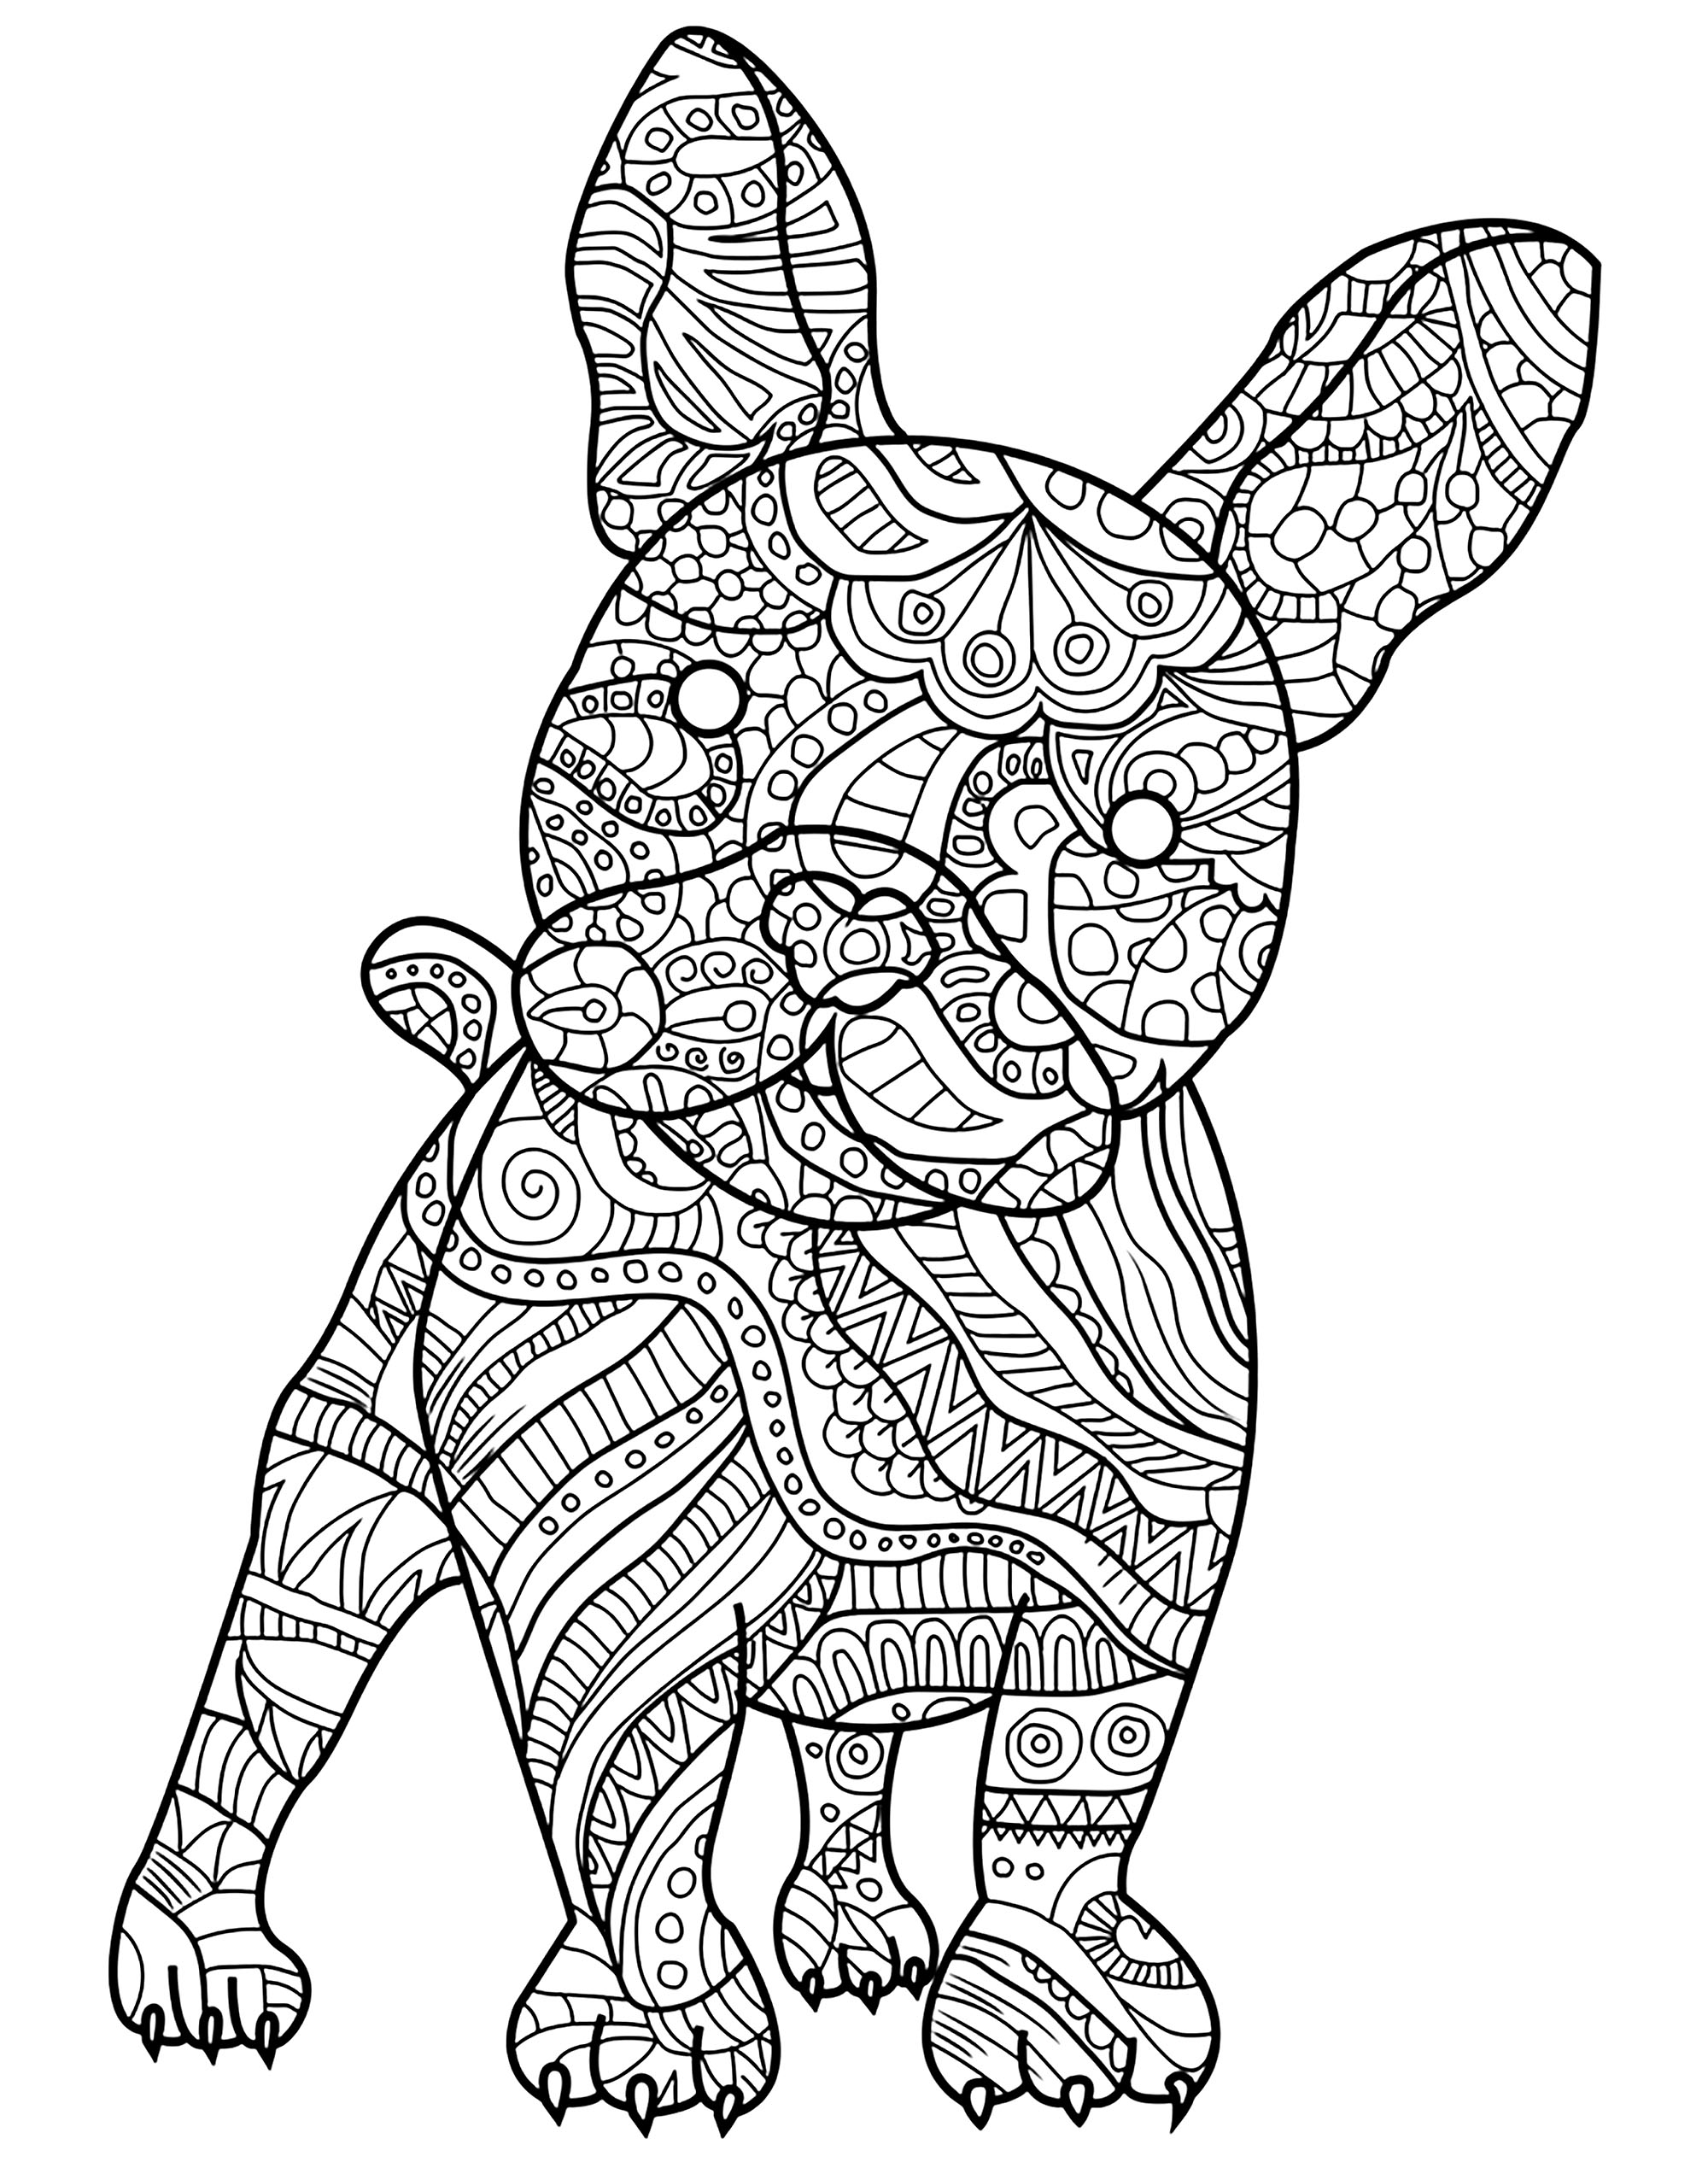 Download French Bulldog and its harmonious patterns - Dogs Adult Coloring Pages